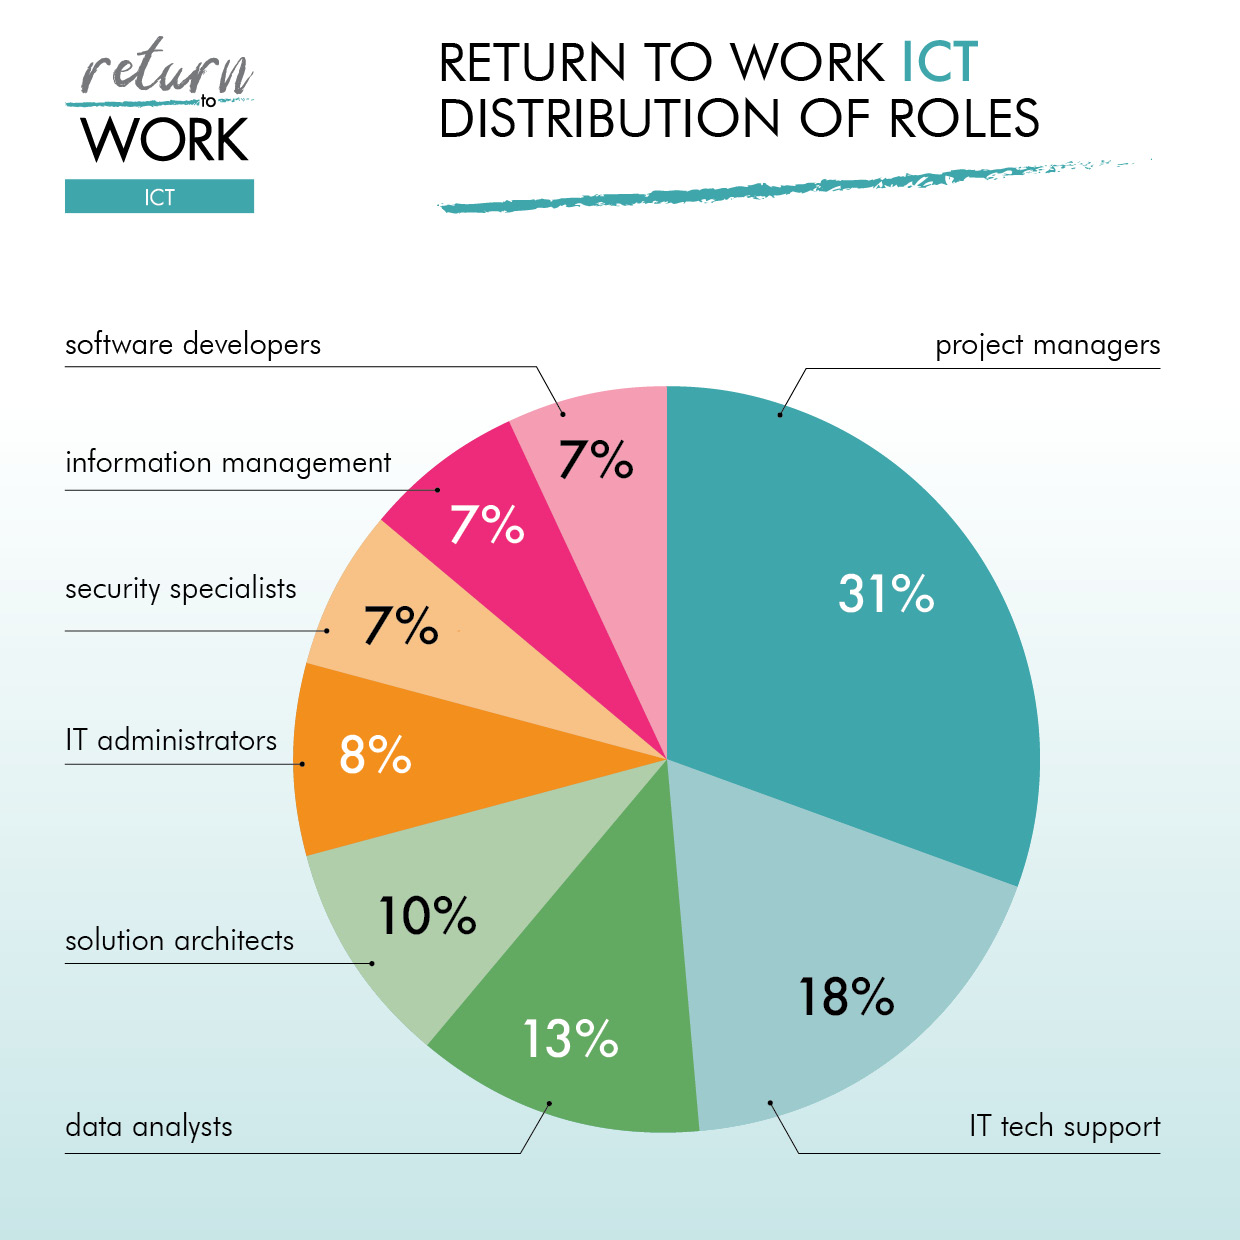 Pie chart showing percentage distribution of roles within the Return to Work ICT candidate pool